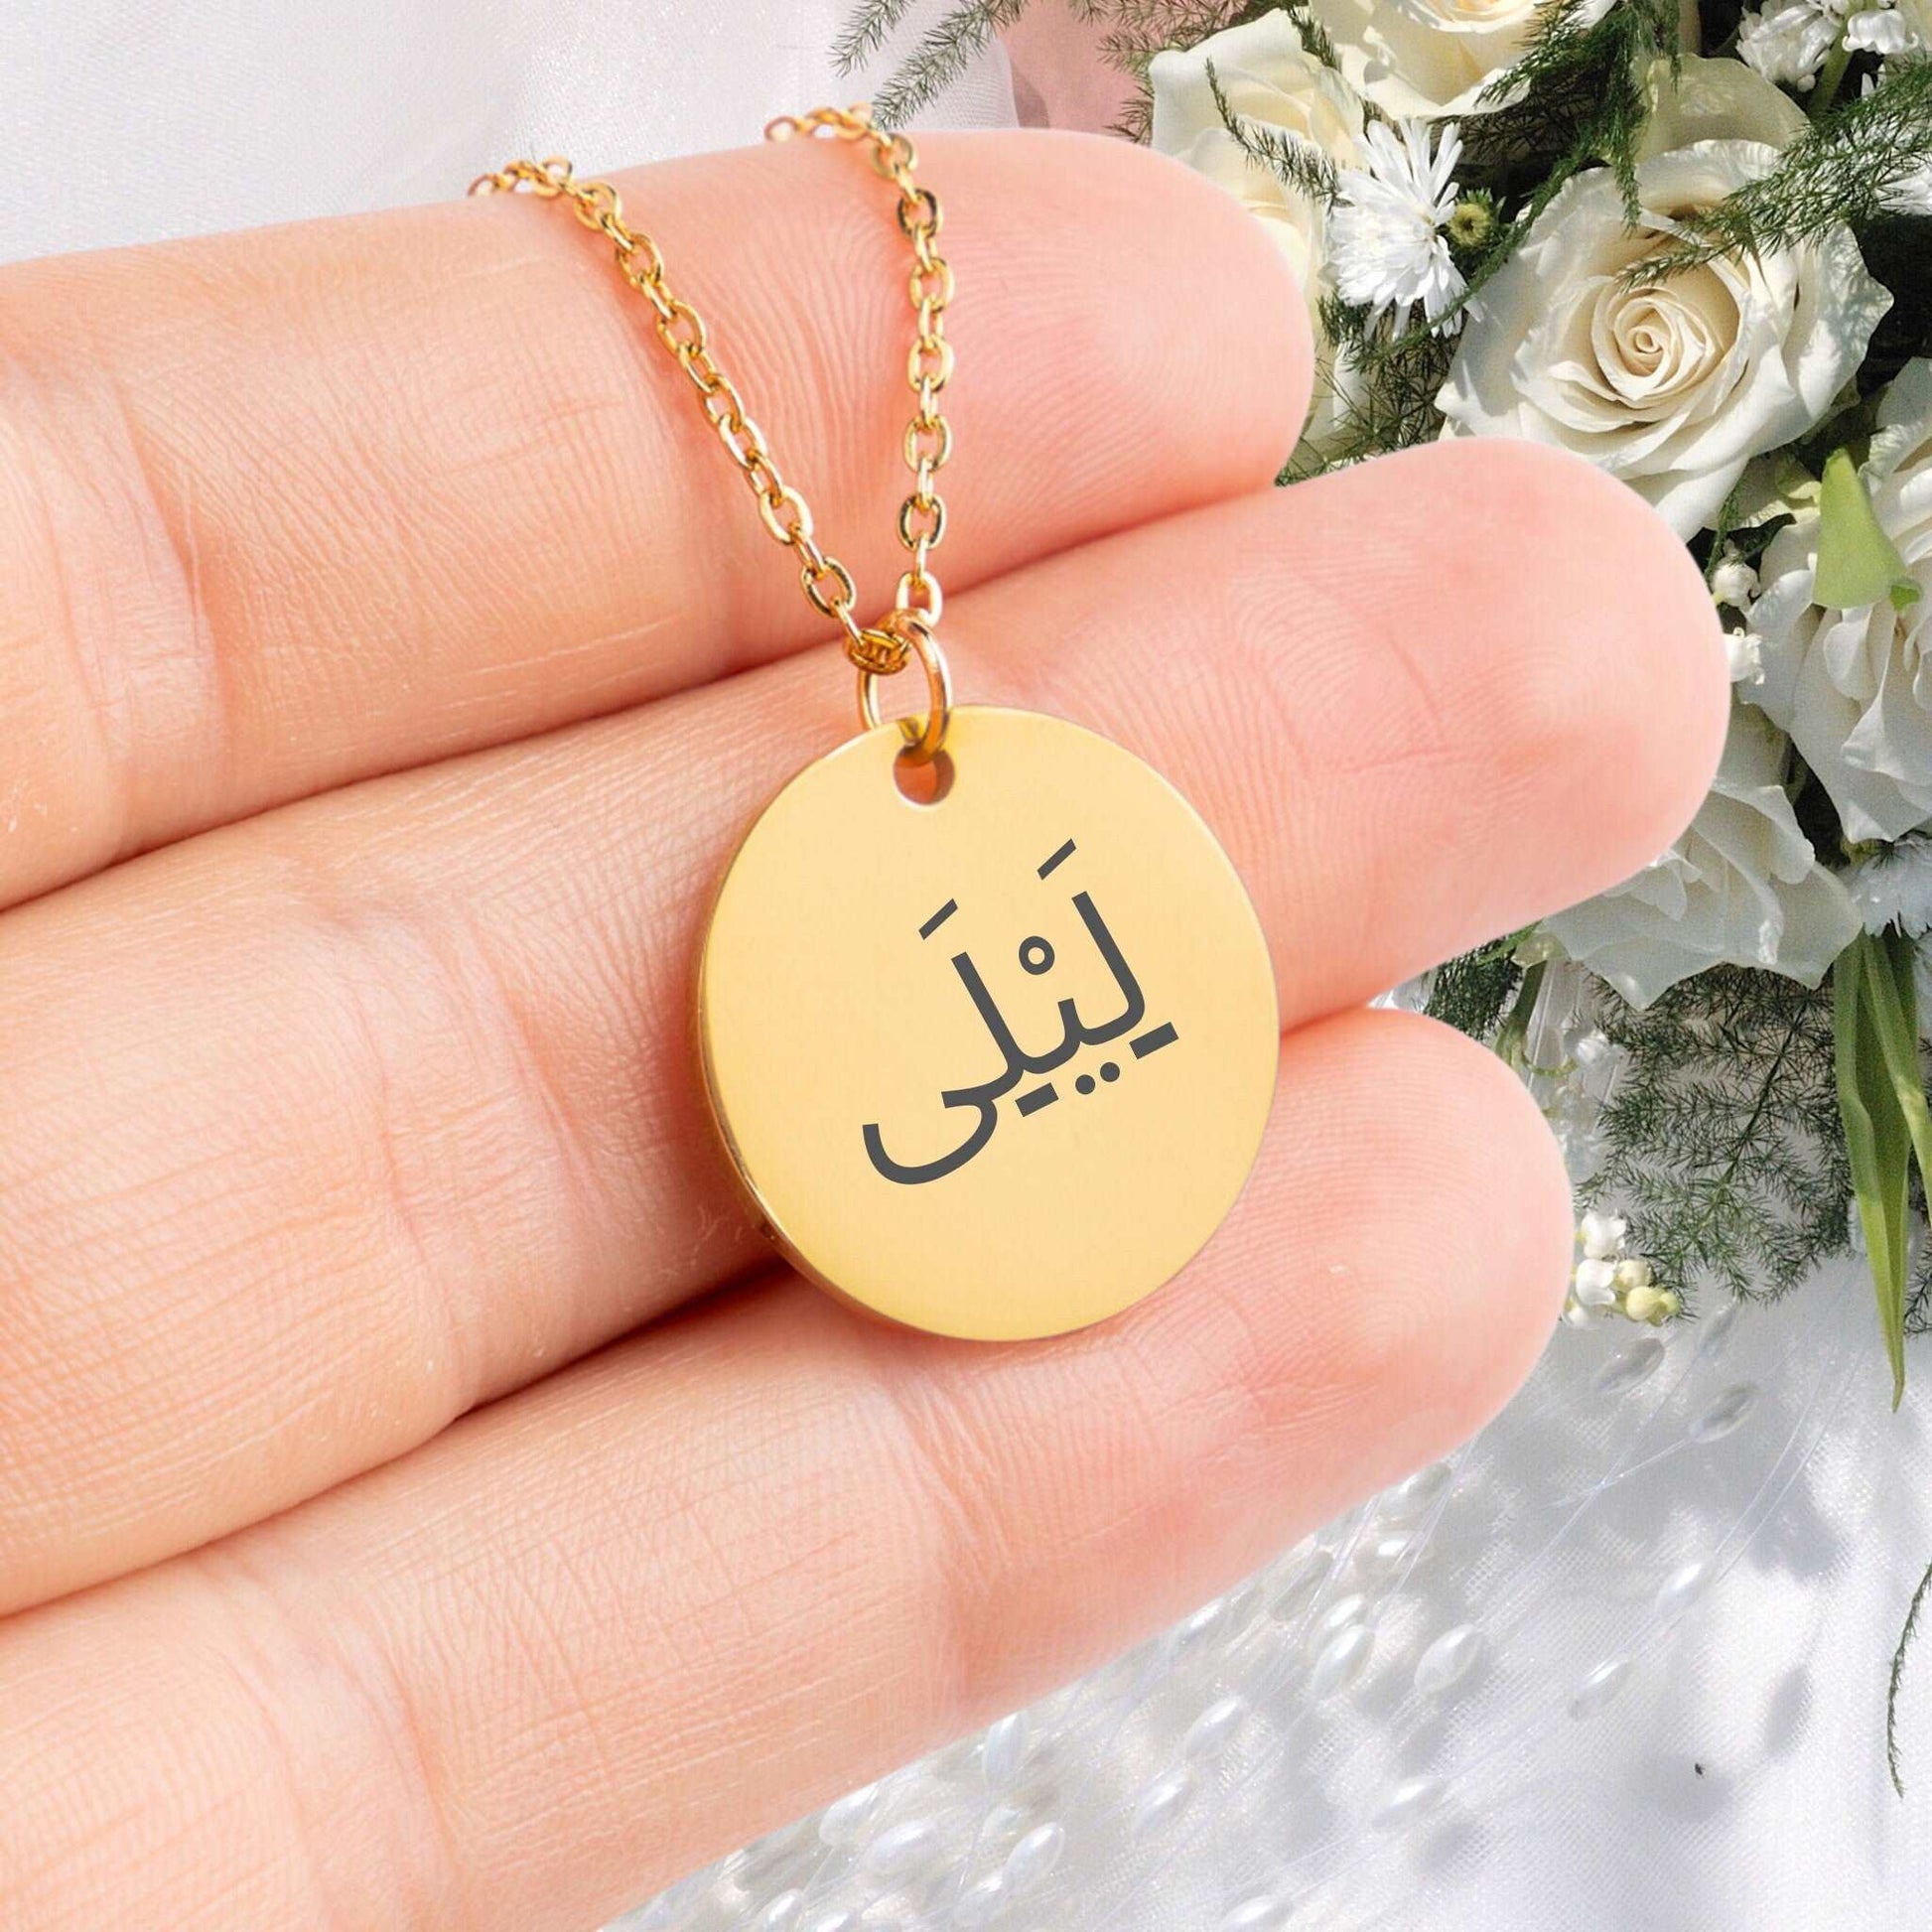 Arabic Name Necklace, Your Name Necklace Personalizable